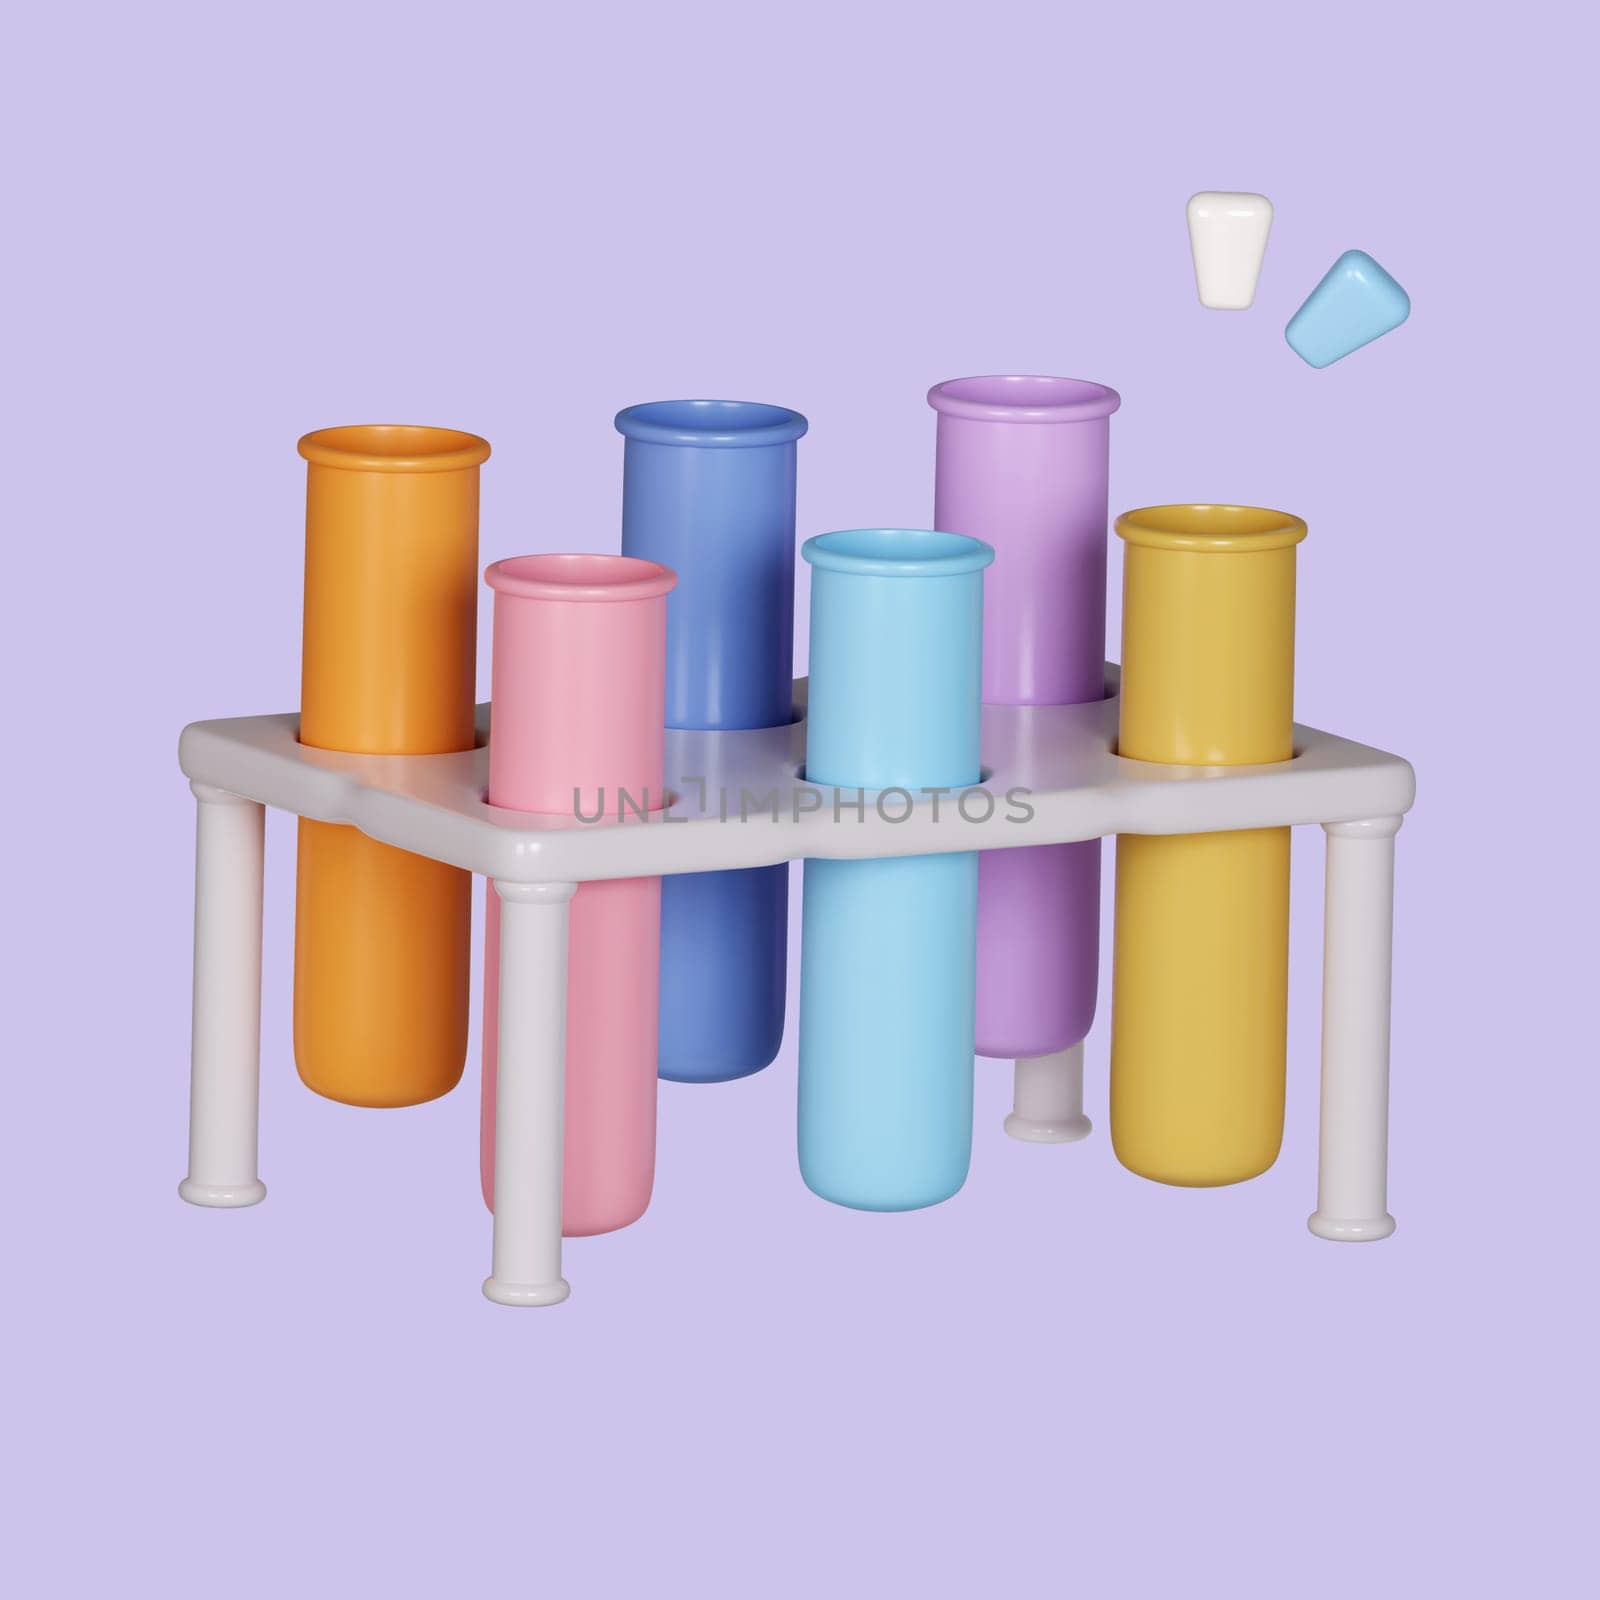 Cartoon conical beaker chemistry isolated on background. icon symbol clipping path. 3d render illustration.